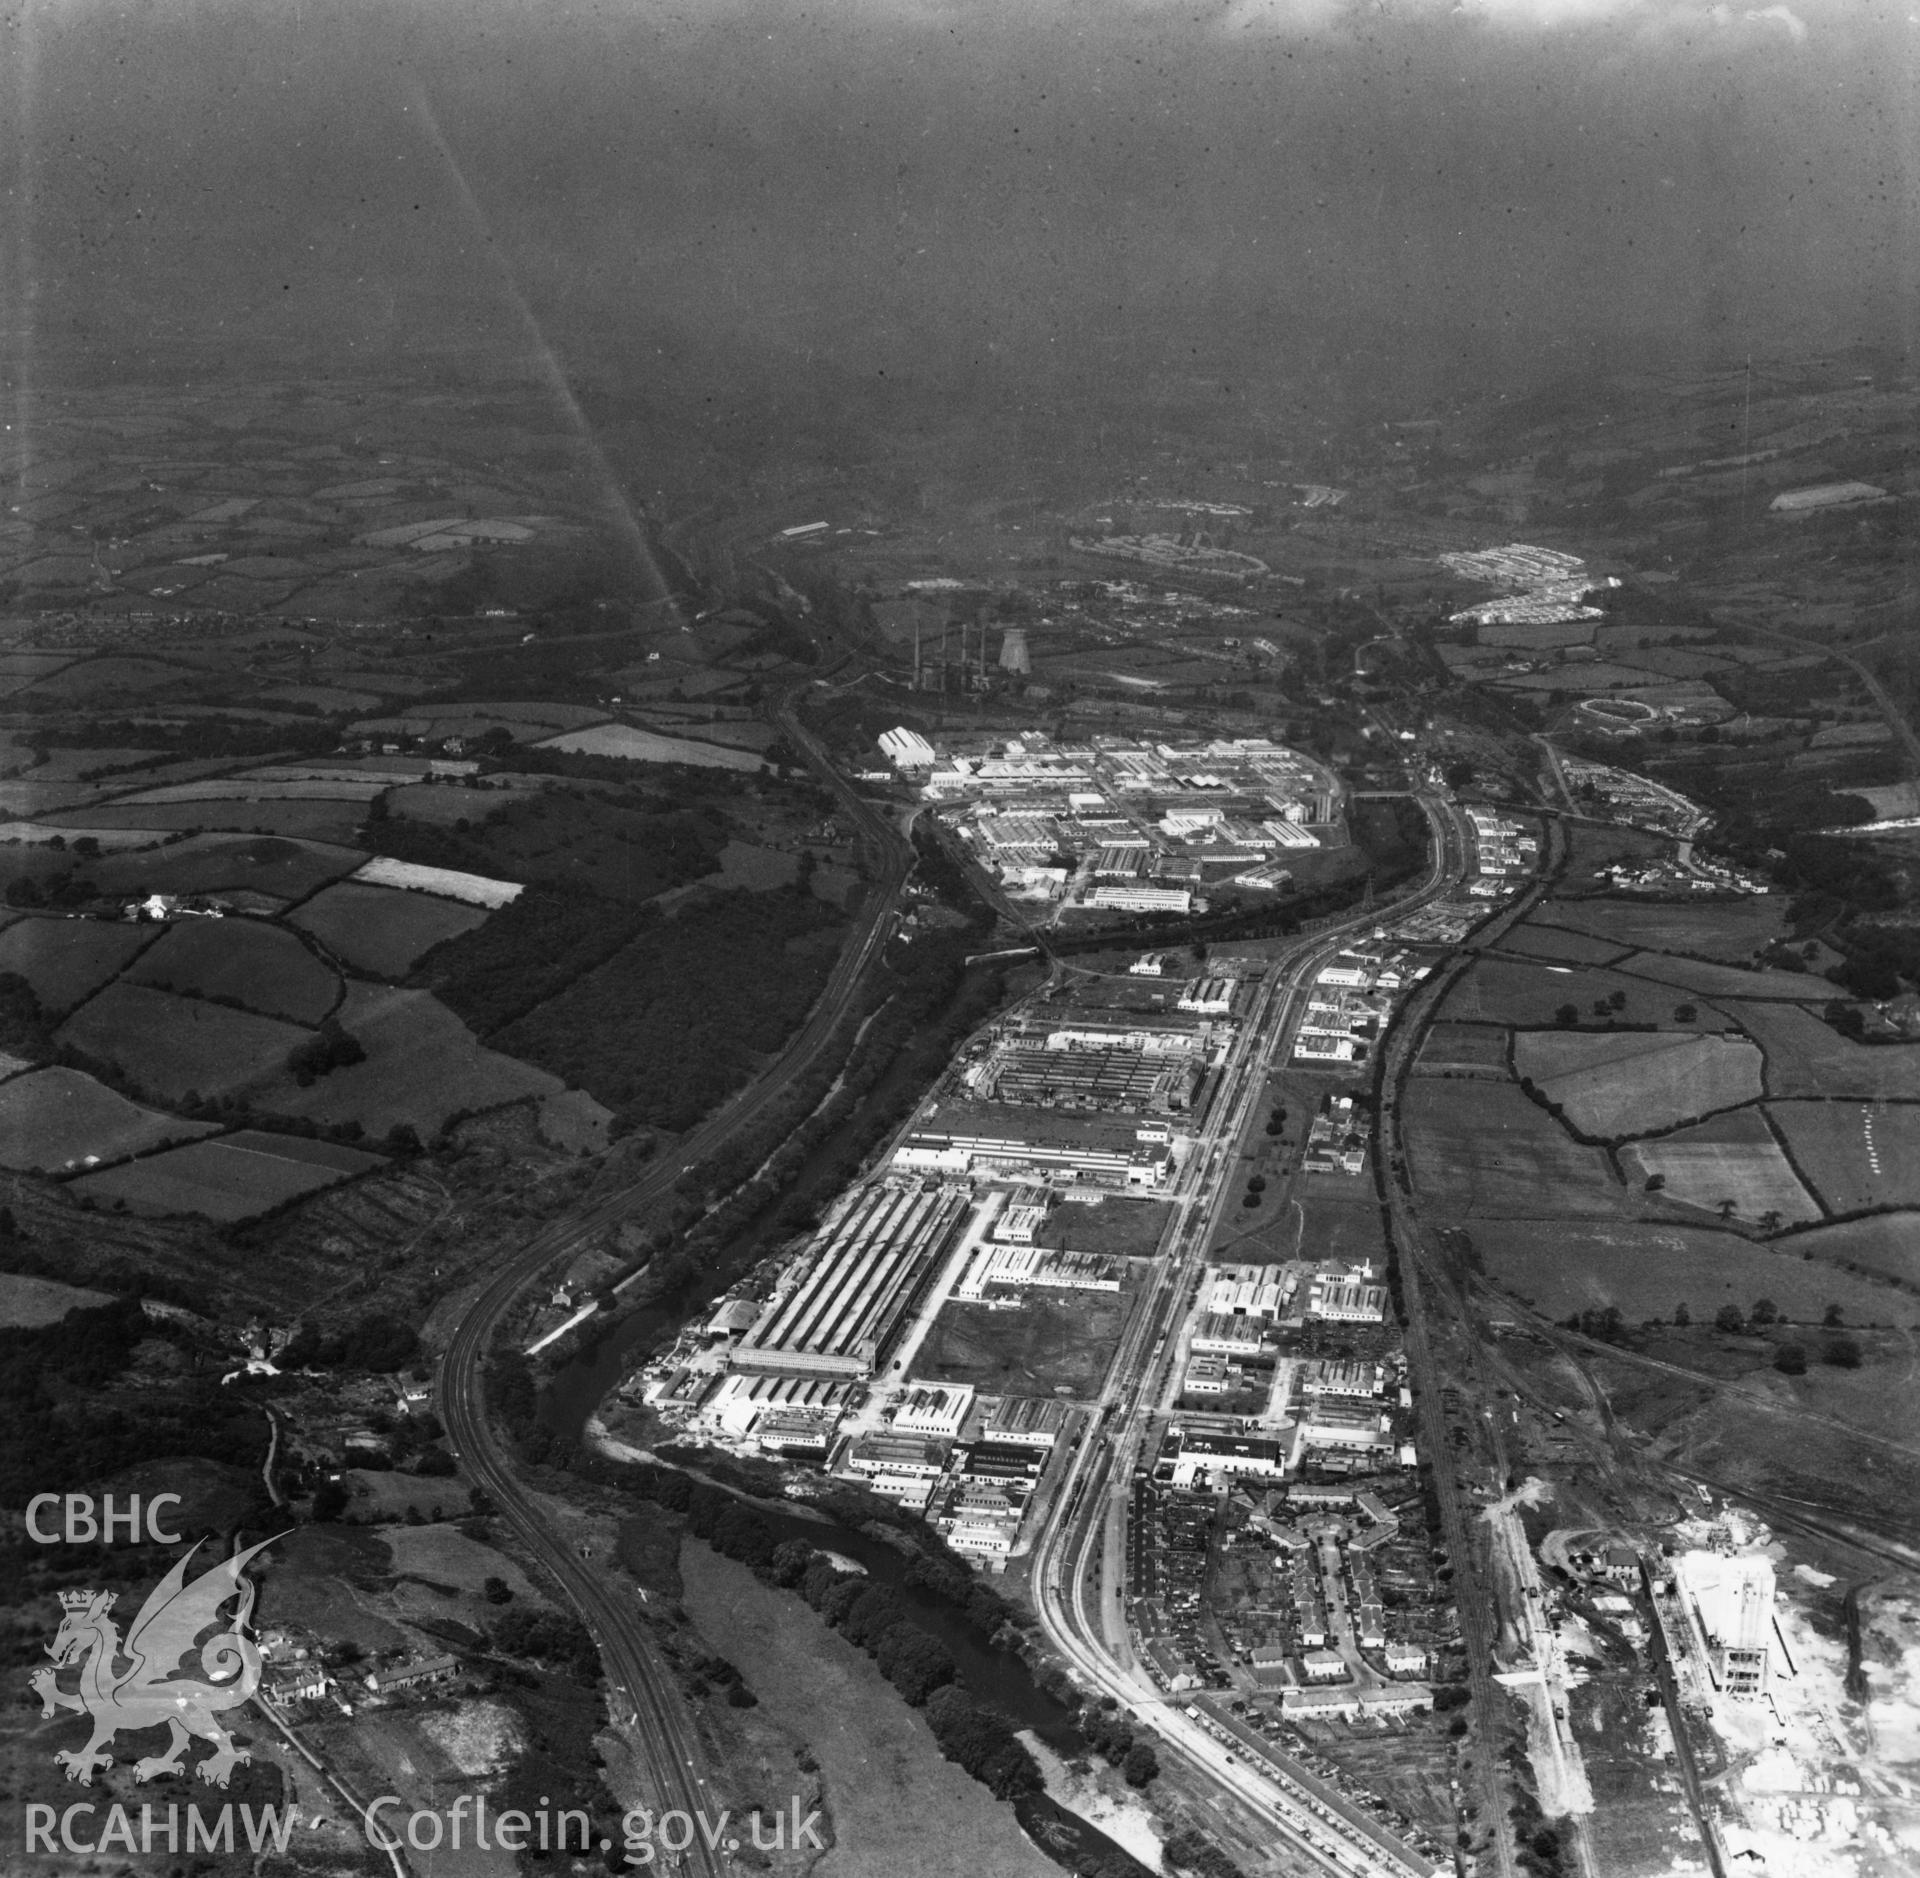 General view of Treforest Trading Estate. Oblique aerial photograph, 5?" cut roll film.